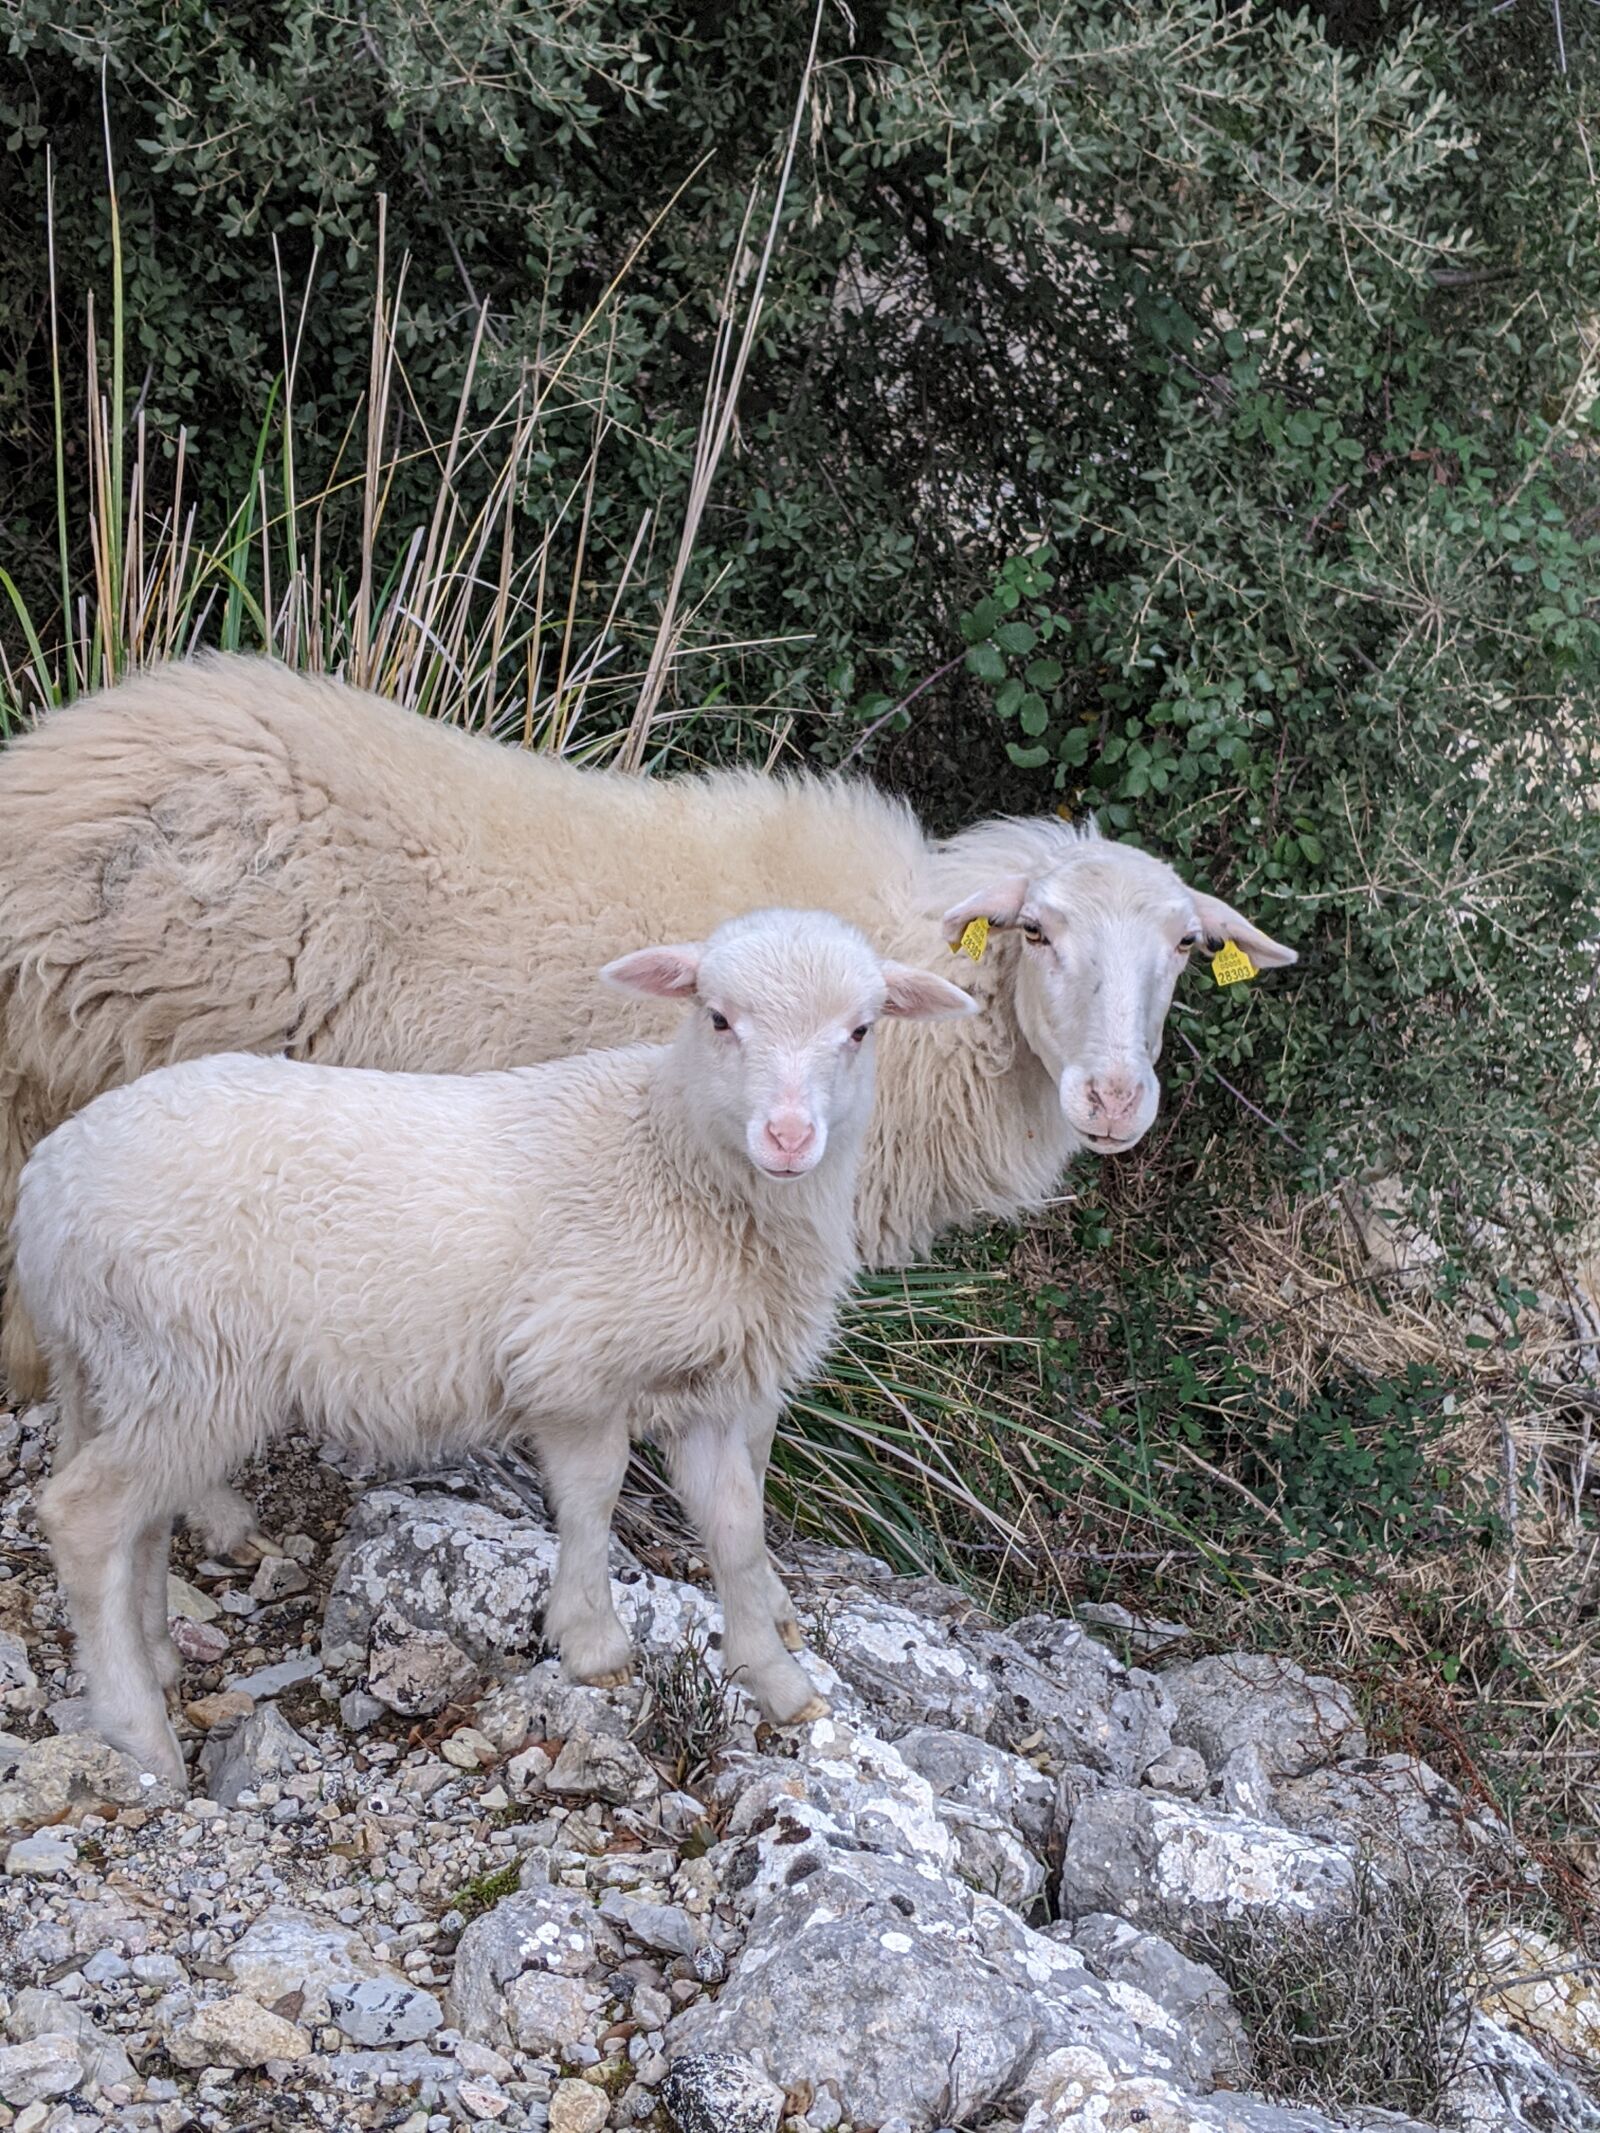 Google Pixel 3a sample photo. Sheep, nature, mother and photography